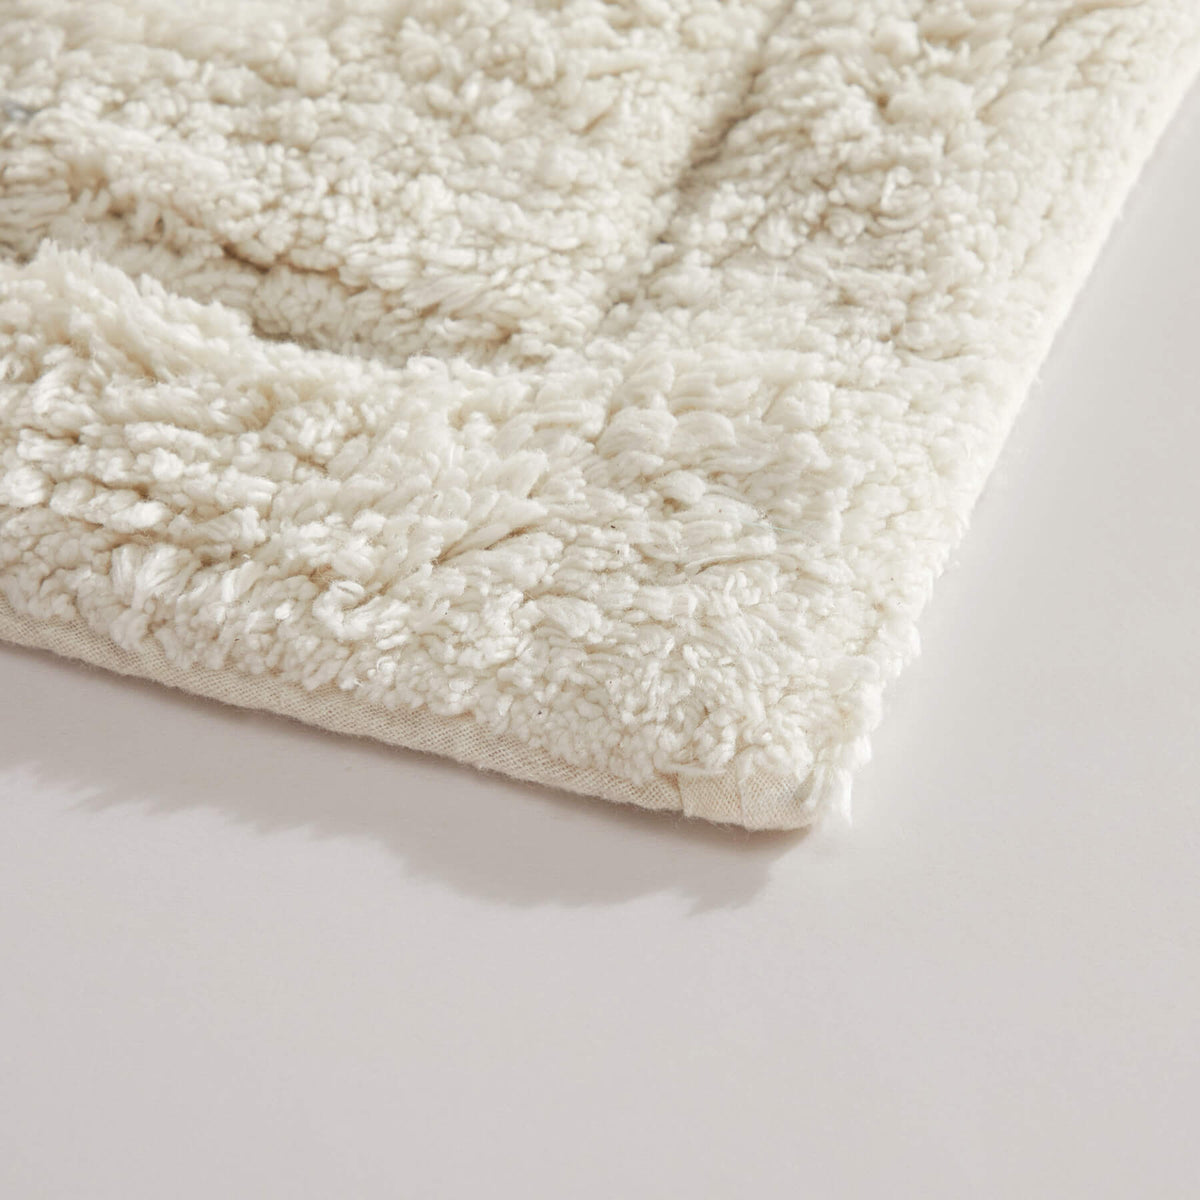 2-Piece Ivory Crochet Edge Bath Rug, 20x32 & 17x24, Neutral, Cotton Sold by at Home